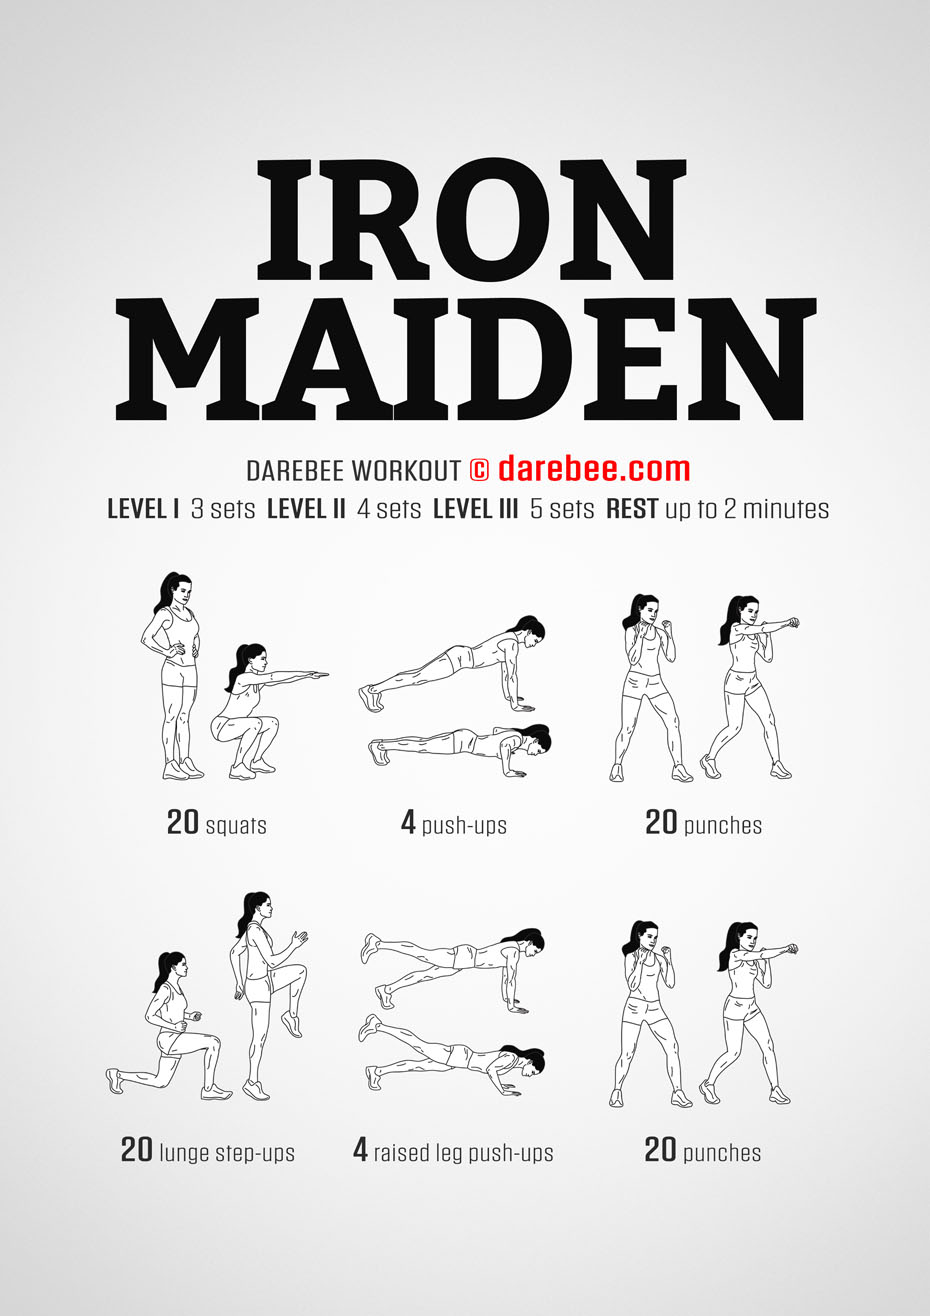 Iron Maiden is a DAREBEE home fitness total body no-equipment home strength and endurance workout for all fitness levels.